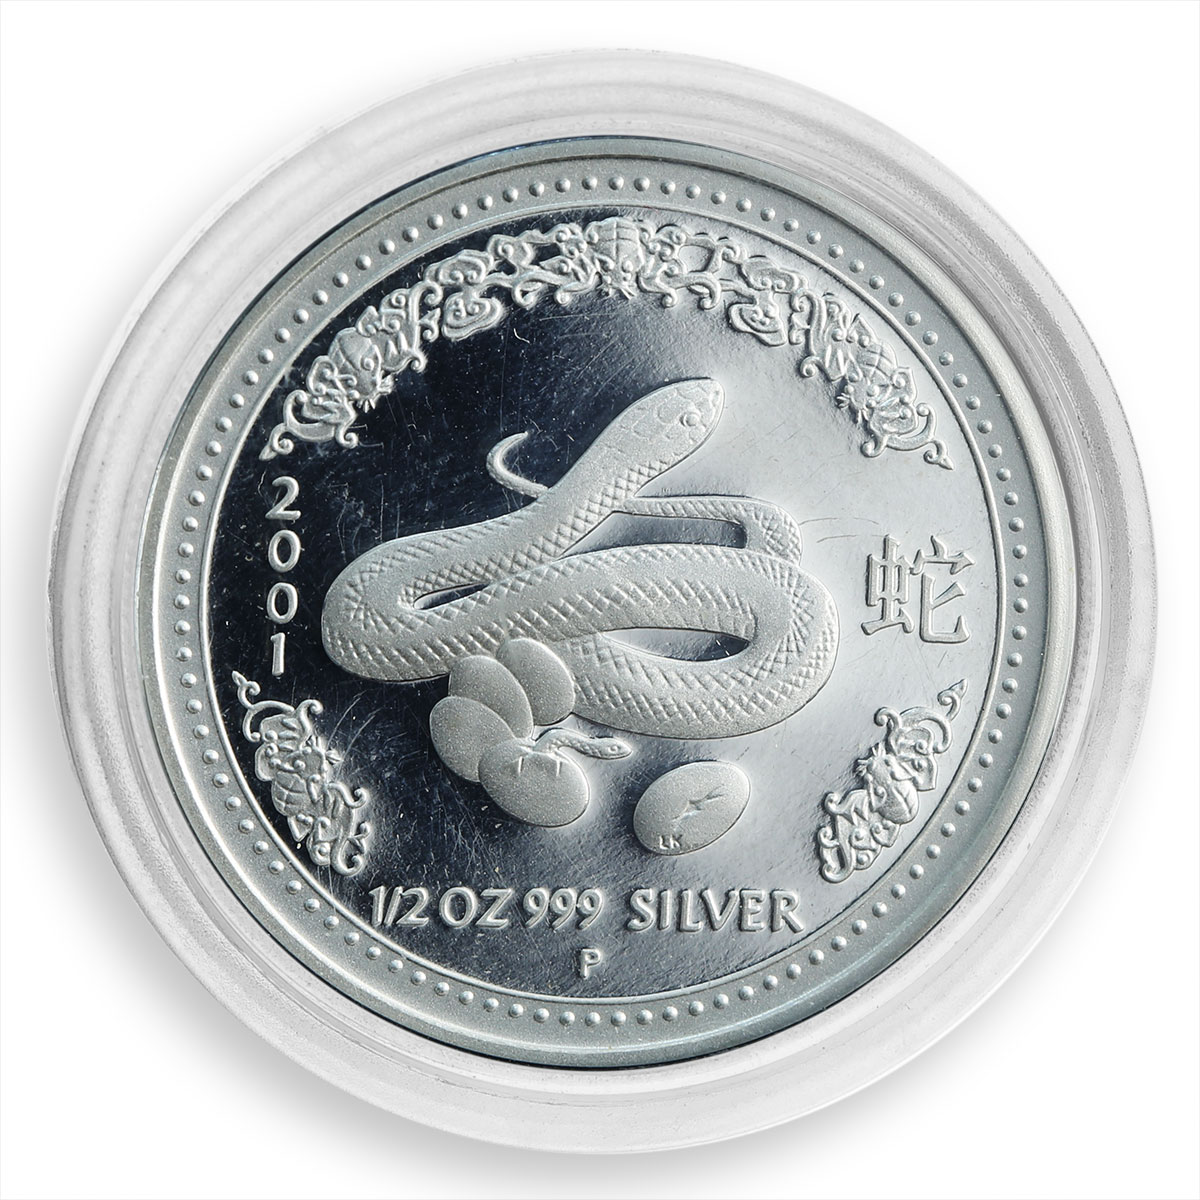 Australia, 50 cents, Lunar YEAR OF THE SNAKE Series I Silver proof 1/2 oz, 2001